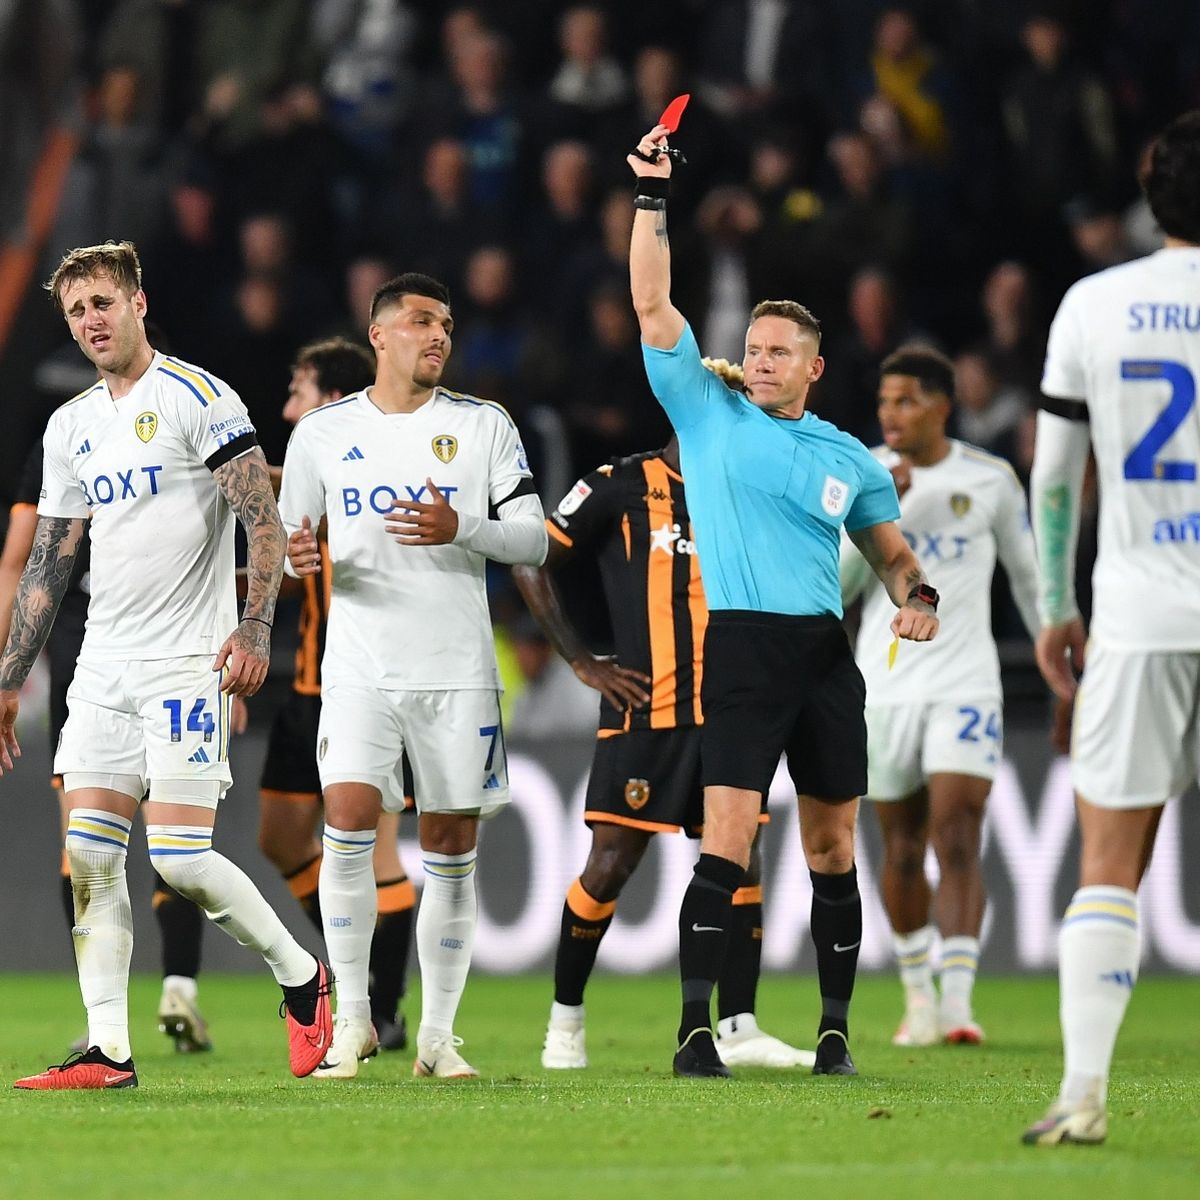 Referee, Stephen Martin. If he's not sending Rodon off v Hull for not actually touching the player. He's denying us a stonewall penalty in each of the last 2 games. Reffed 4 #lufc games this season, & 3 of them controversial. He had a clear view today, no excuse for missing pen.